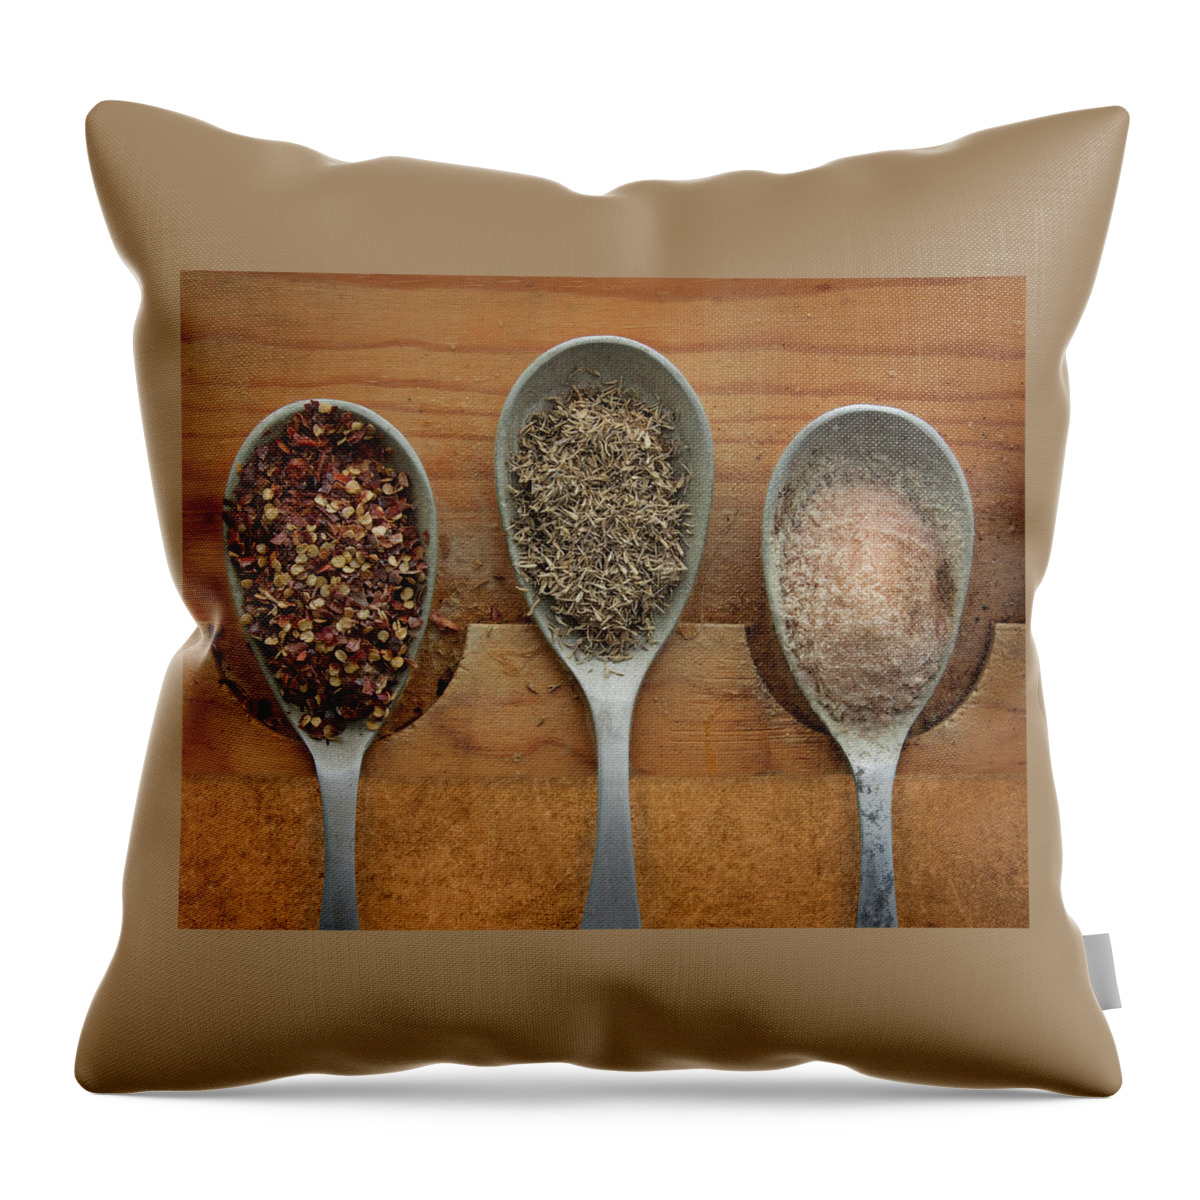 Spice Throw Pillow featuring the photograph Spicy by Mitch Spence